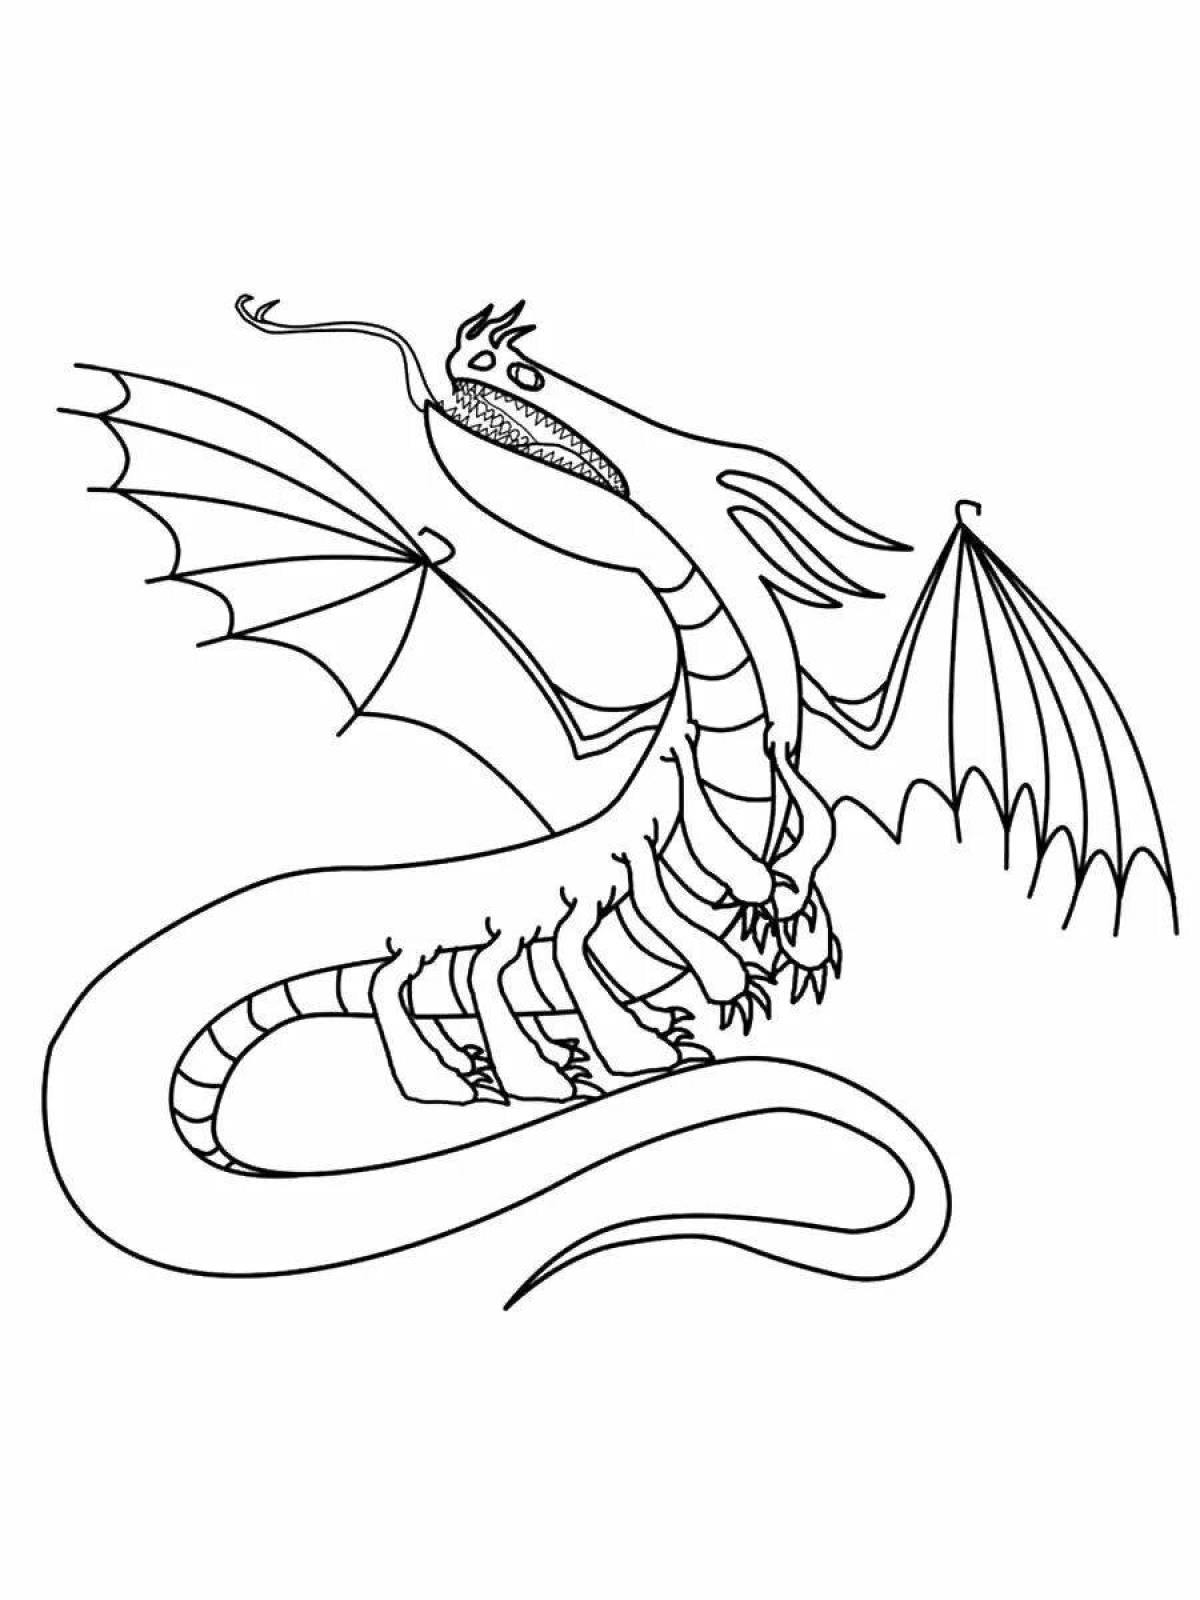 Awesome death dragon whisper coloring page